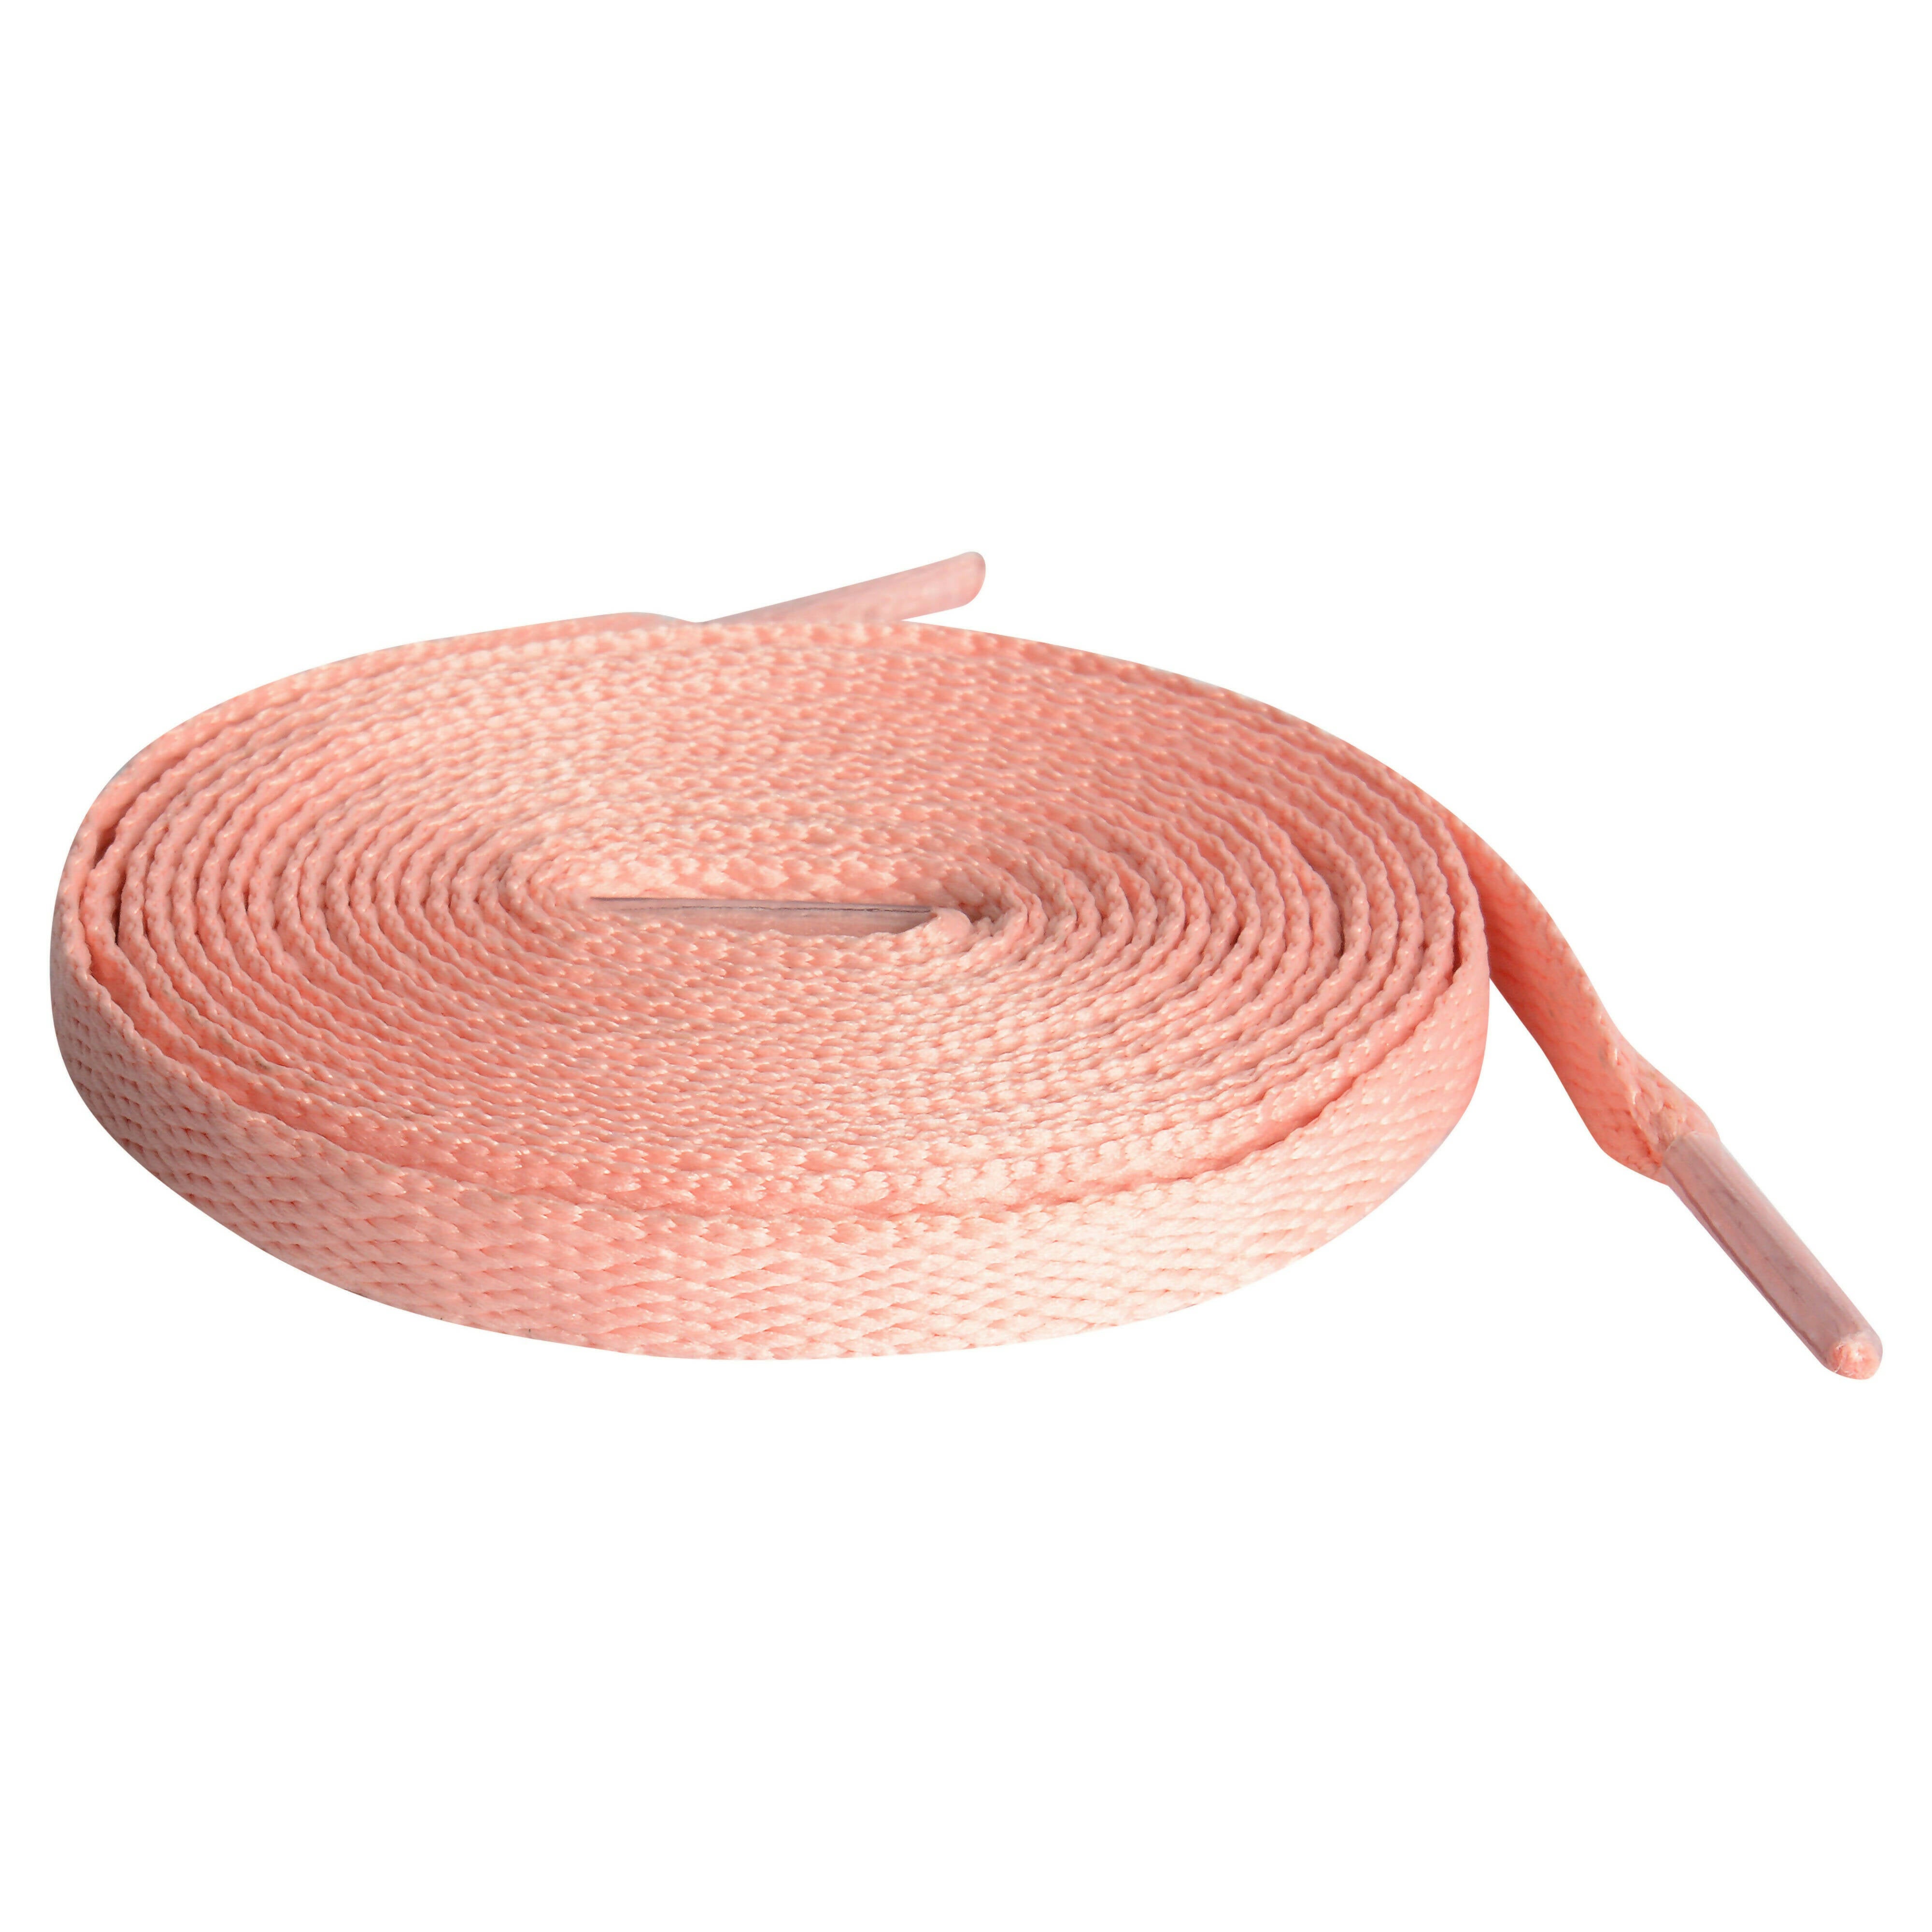 Flat Laces Pack of 5 ( UNC, Soft Pink,Peach,Punch pink, n.orange)